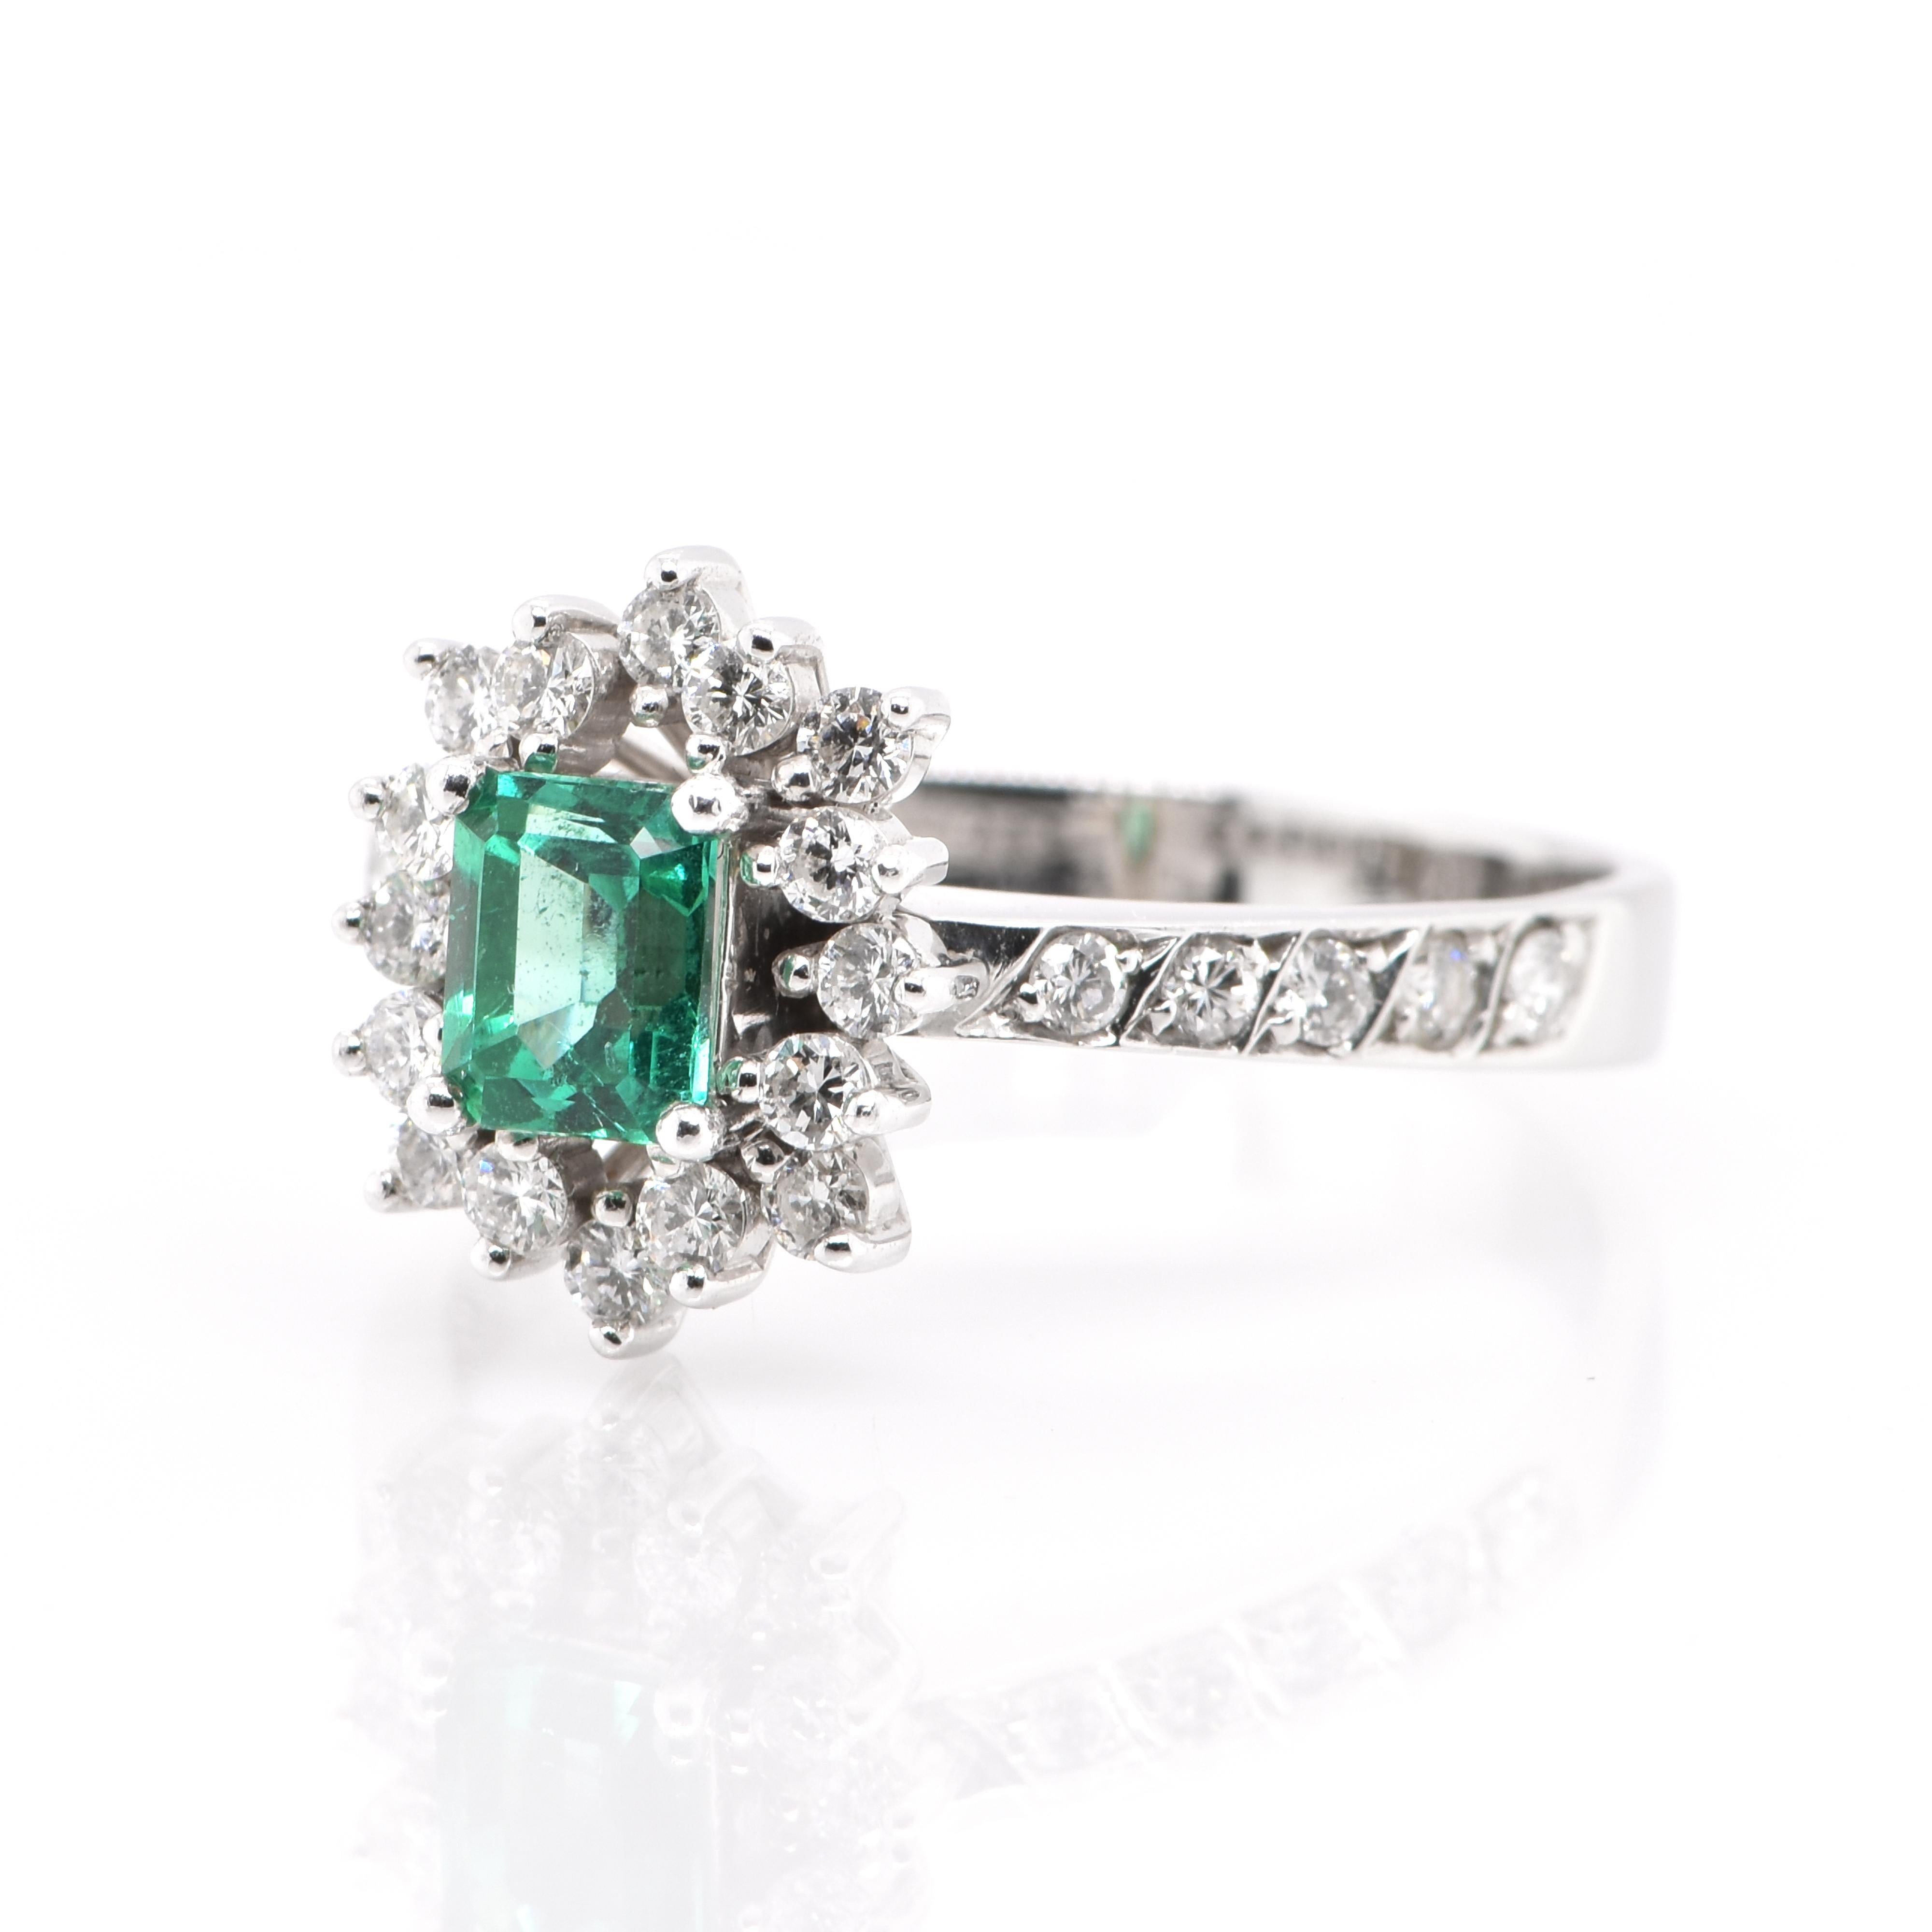 A stunning Ring featuring a 0.63 Carat, Natural, Colombian Emerald and 0.44 Carats of Diamond Accents set in Platinum. People have admired emerald’s green for thousands of years. Emeralds have always been associated with the lushest landscapes and